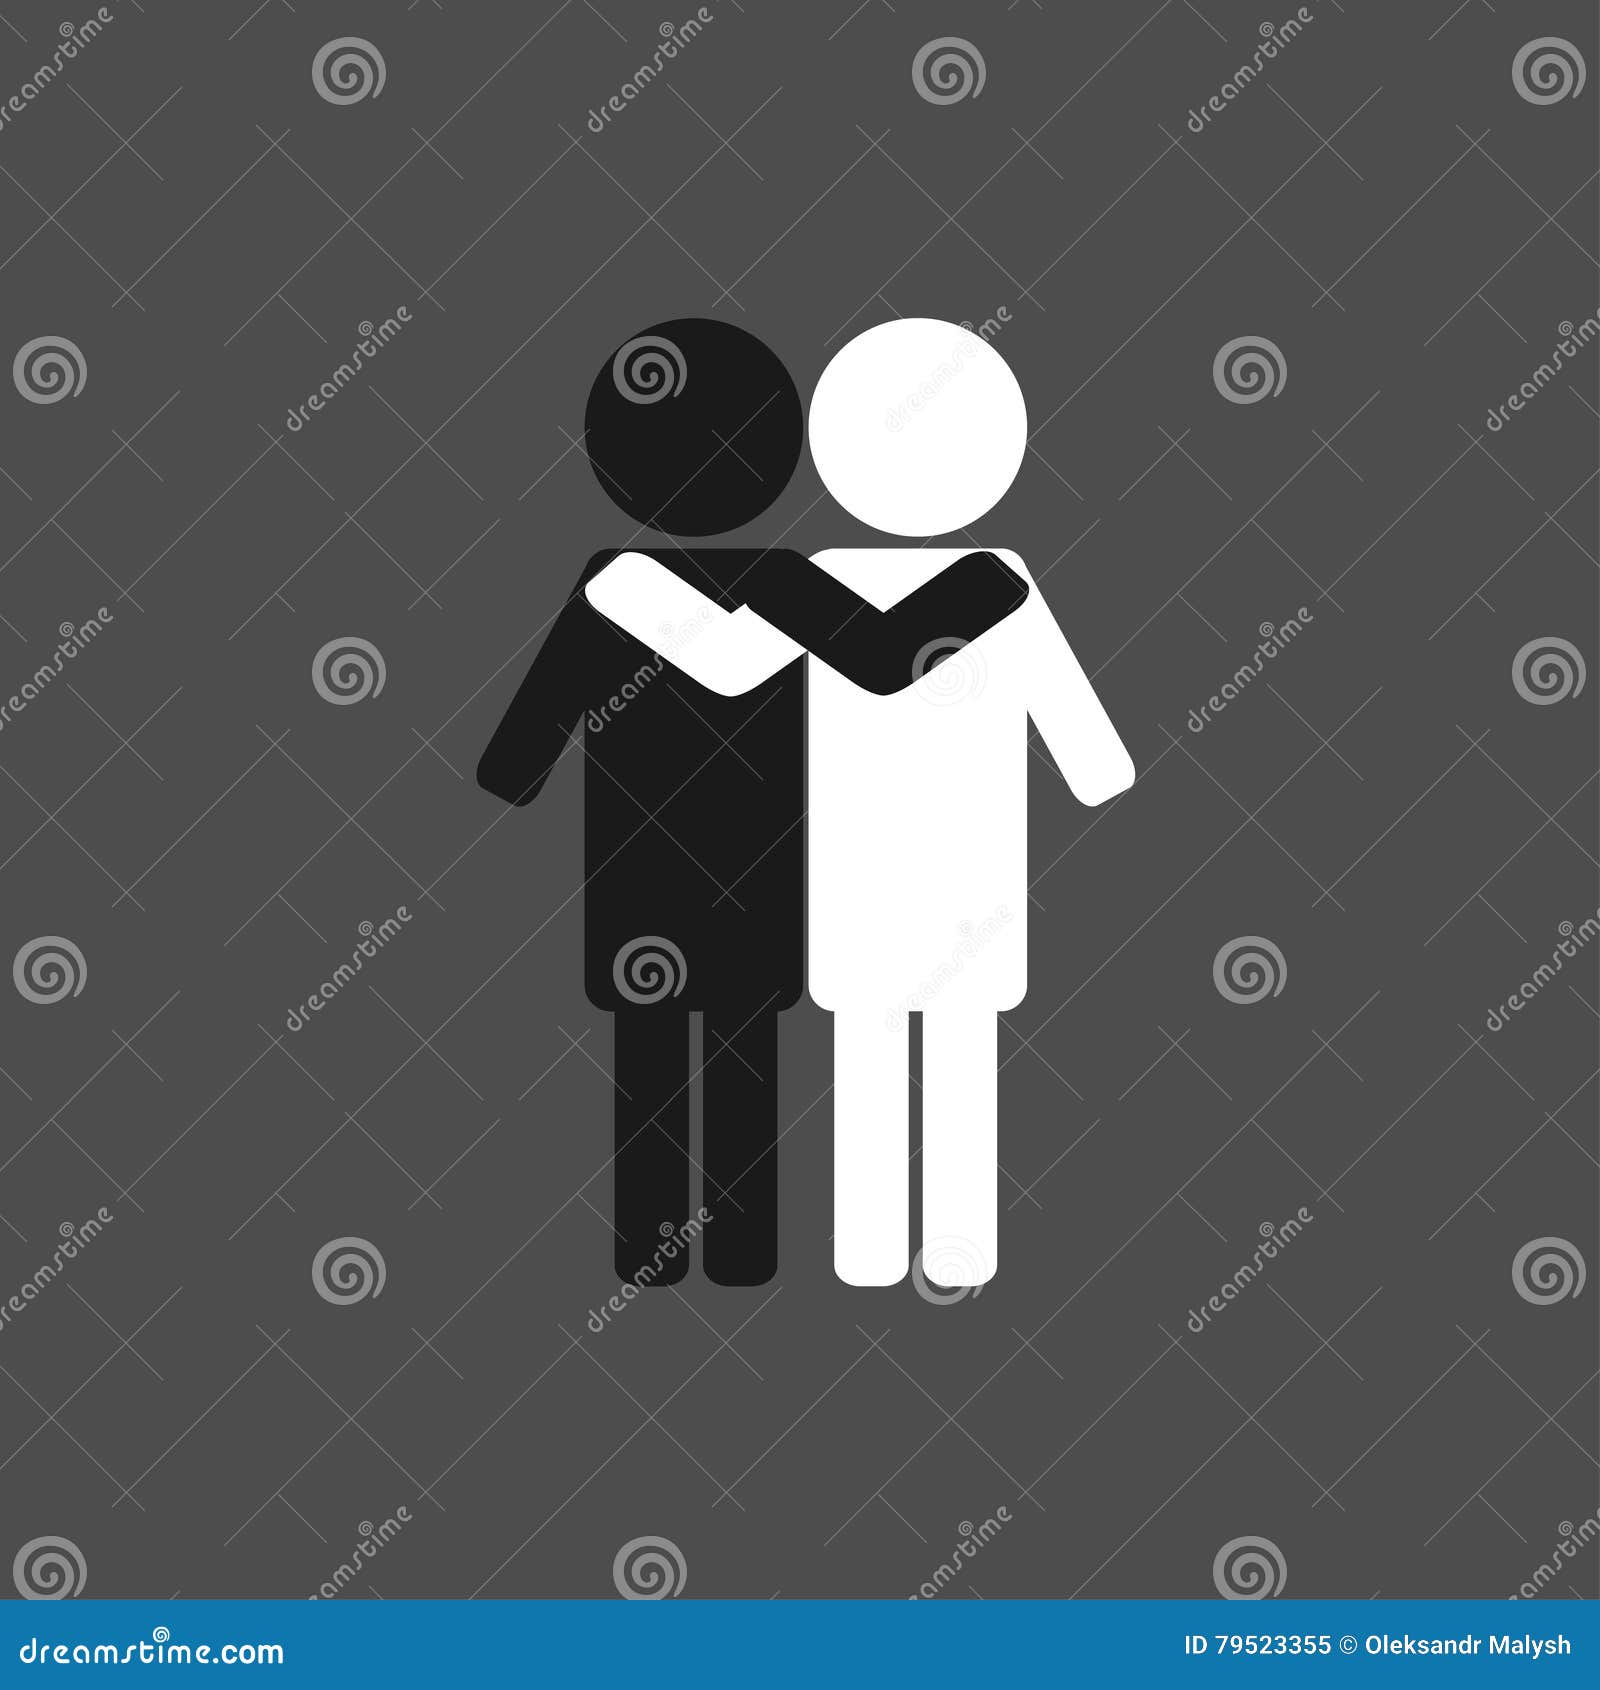 Friendship stock vector. Illustration of icon, happiness - 79523355